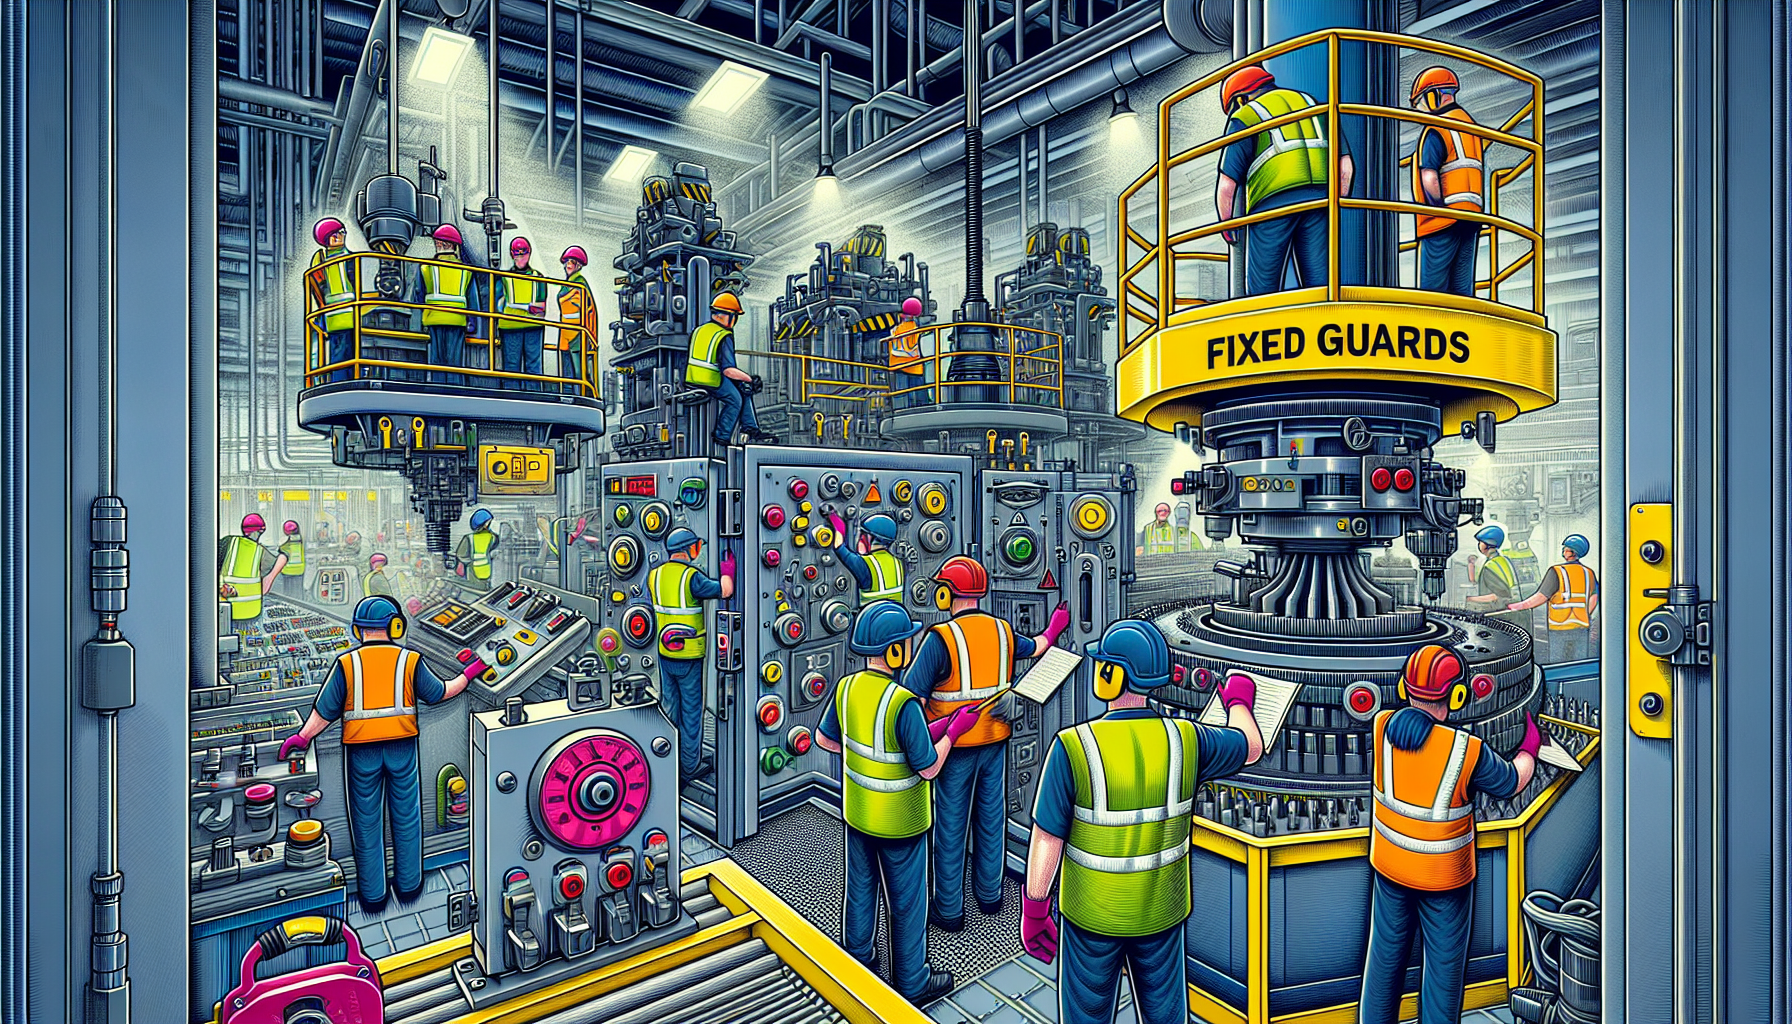 Illustration of various safety equipment including machine guards and personal protective gear